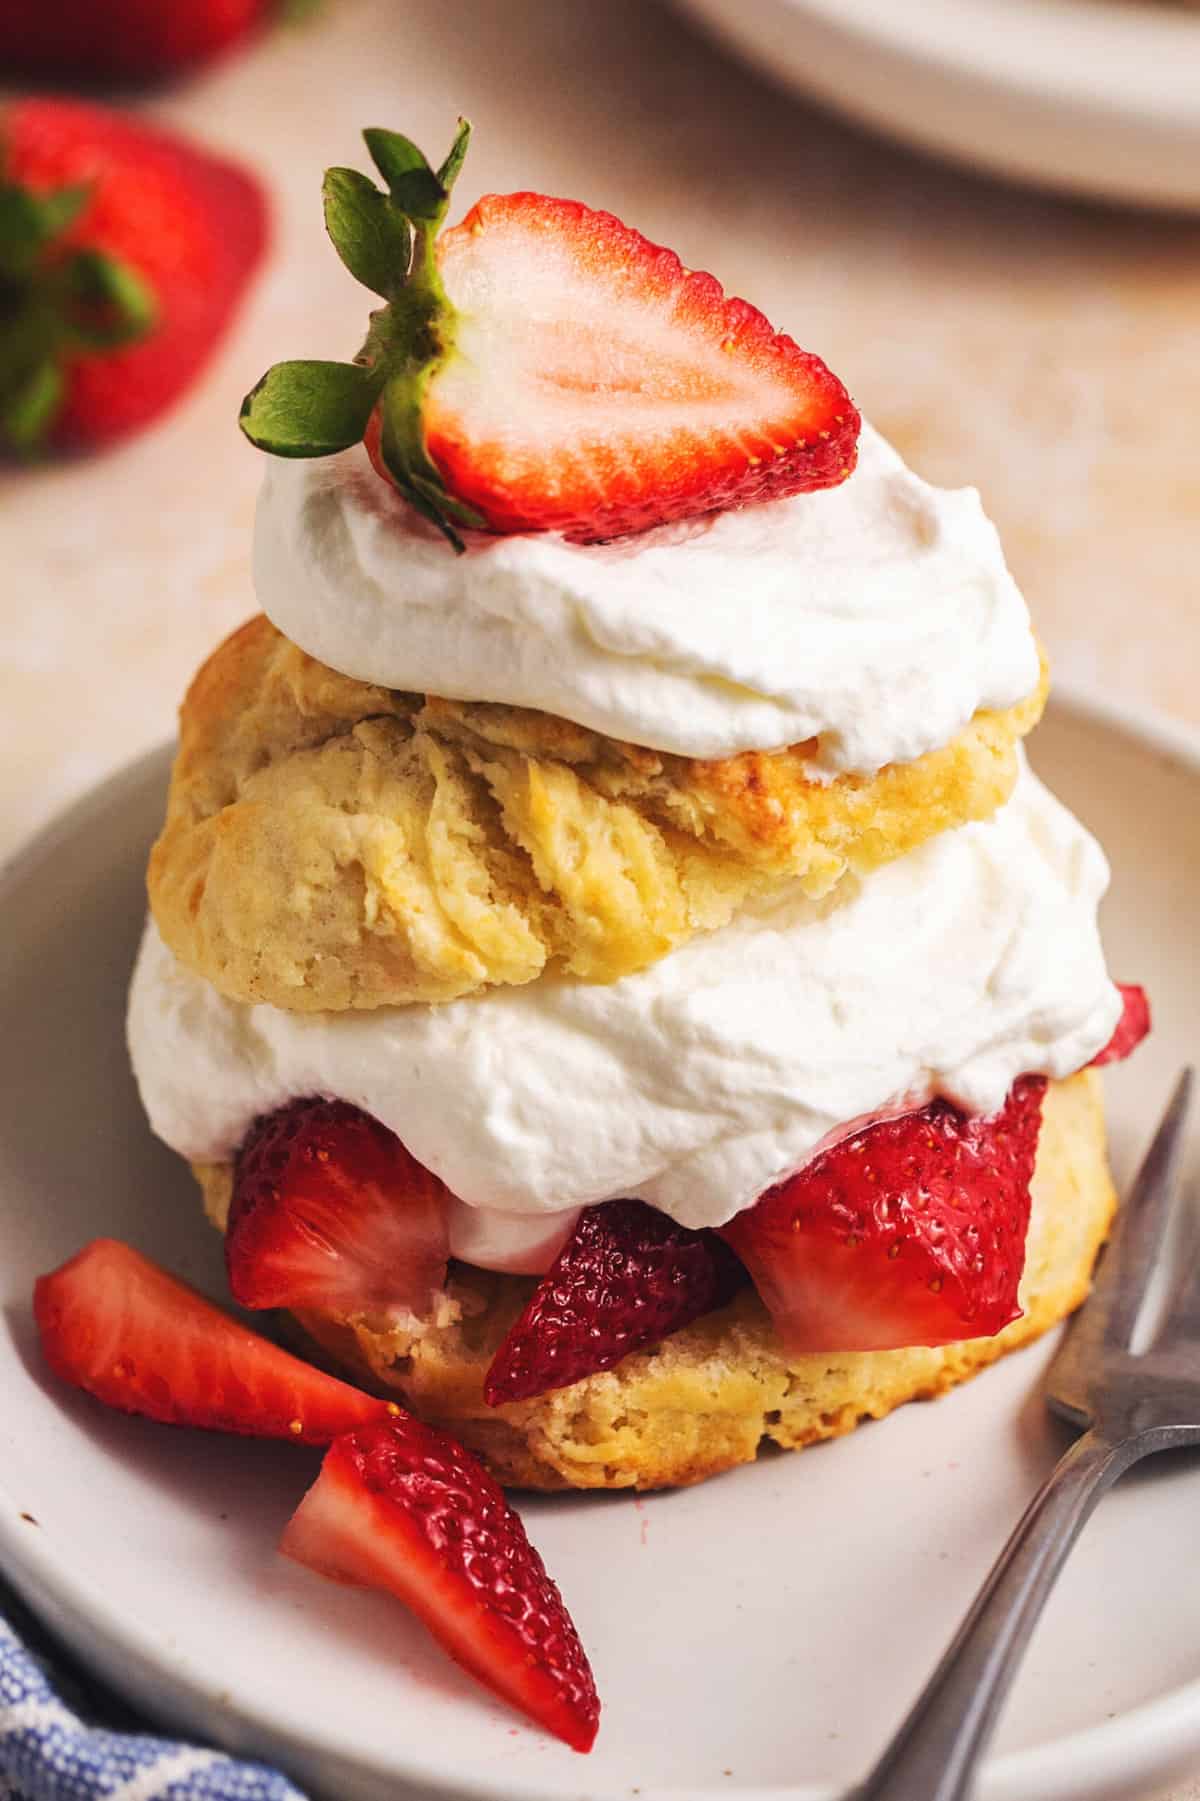 Strawberry Biscuits - The Real Recipes